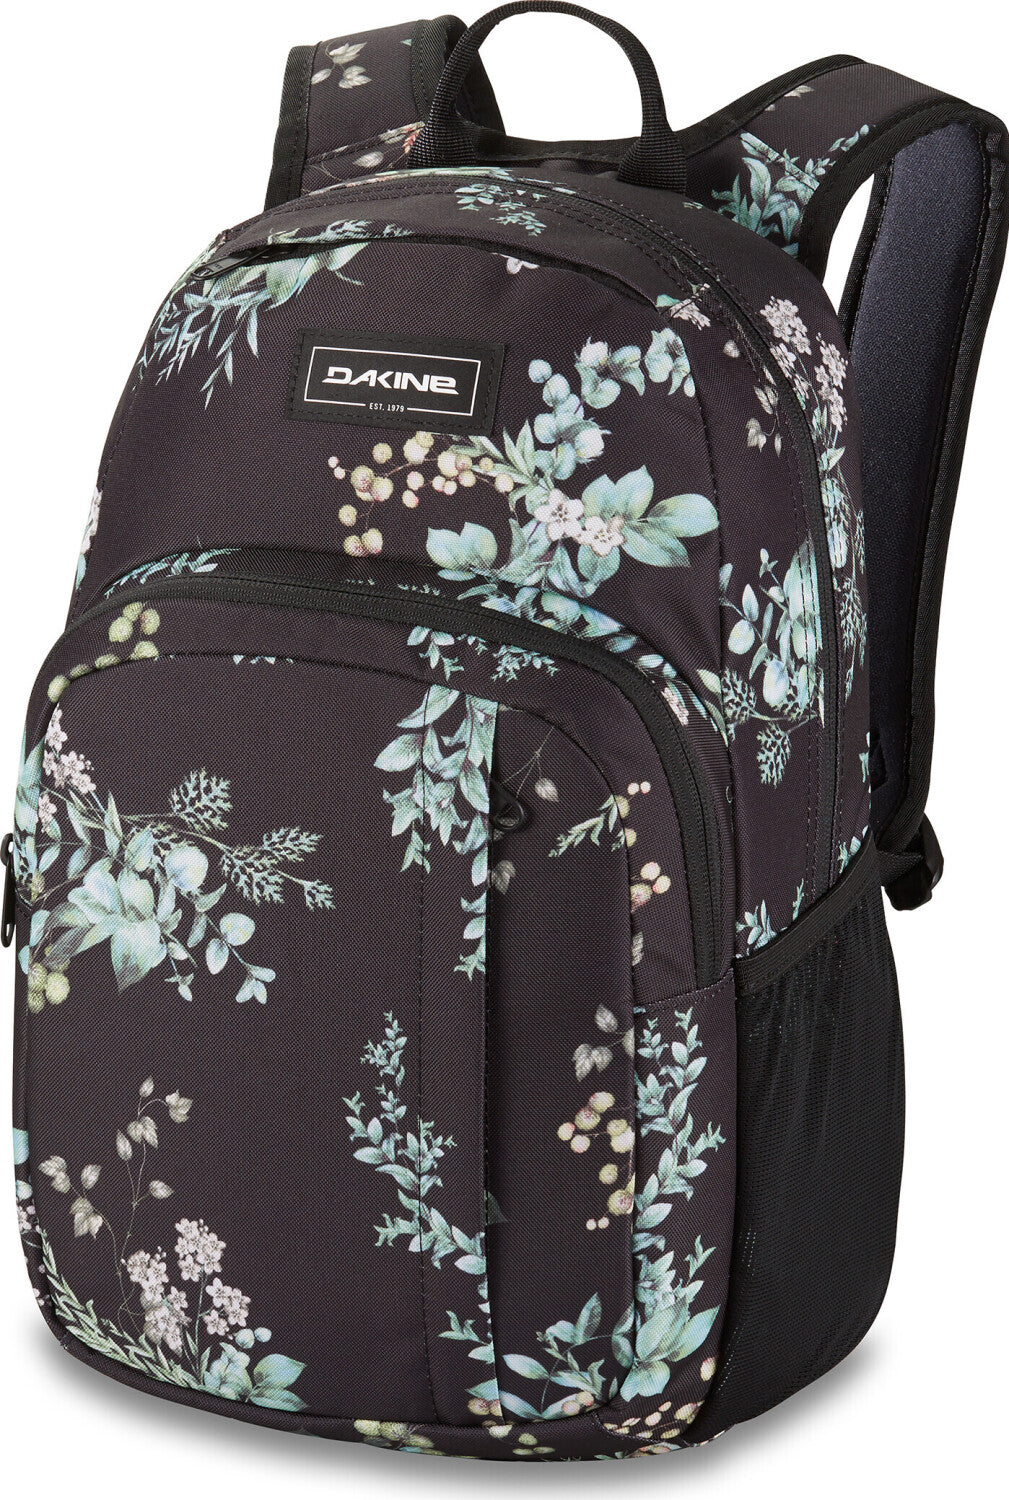 Dakine Campus Small Backpack – SURF WORLD